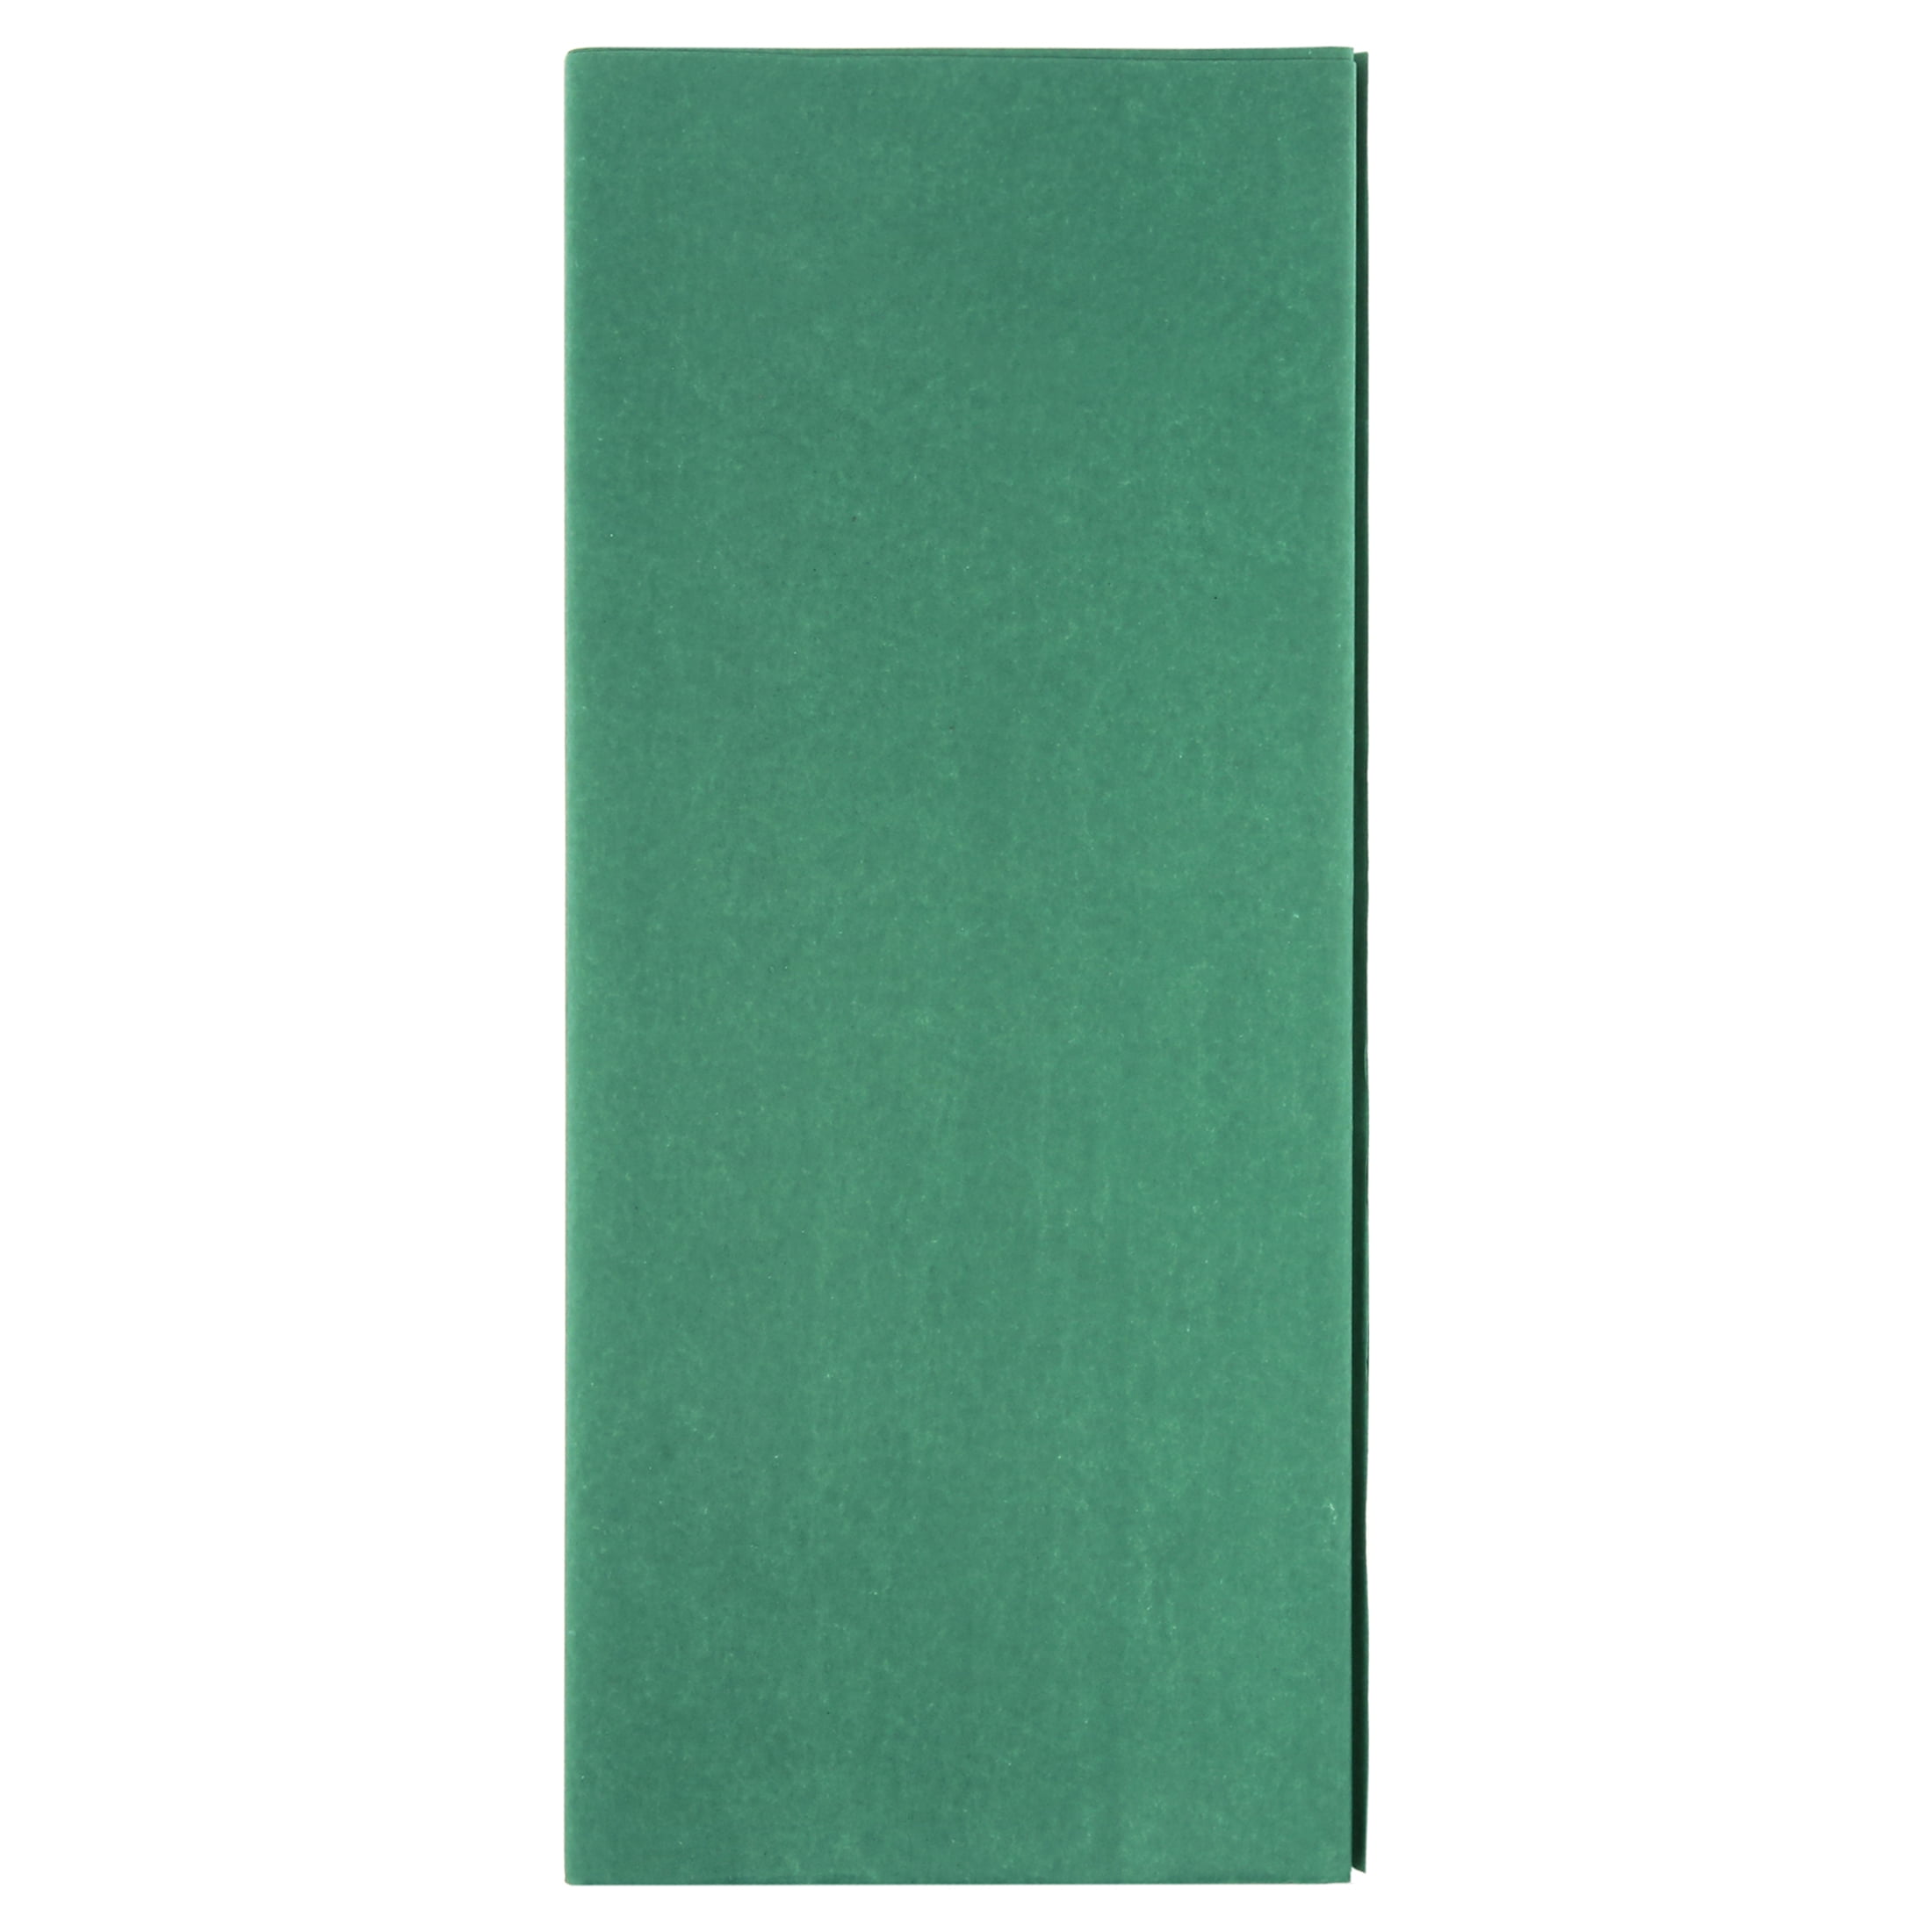 Holiday Green Wrap Tissue Paper 15 inch x 20 inch - 100 Sheets